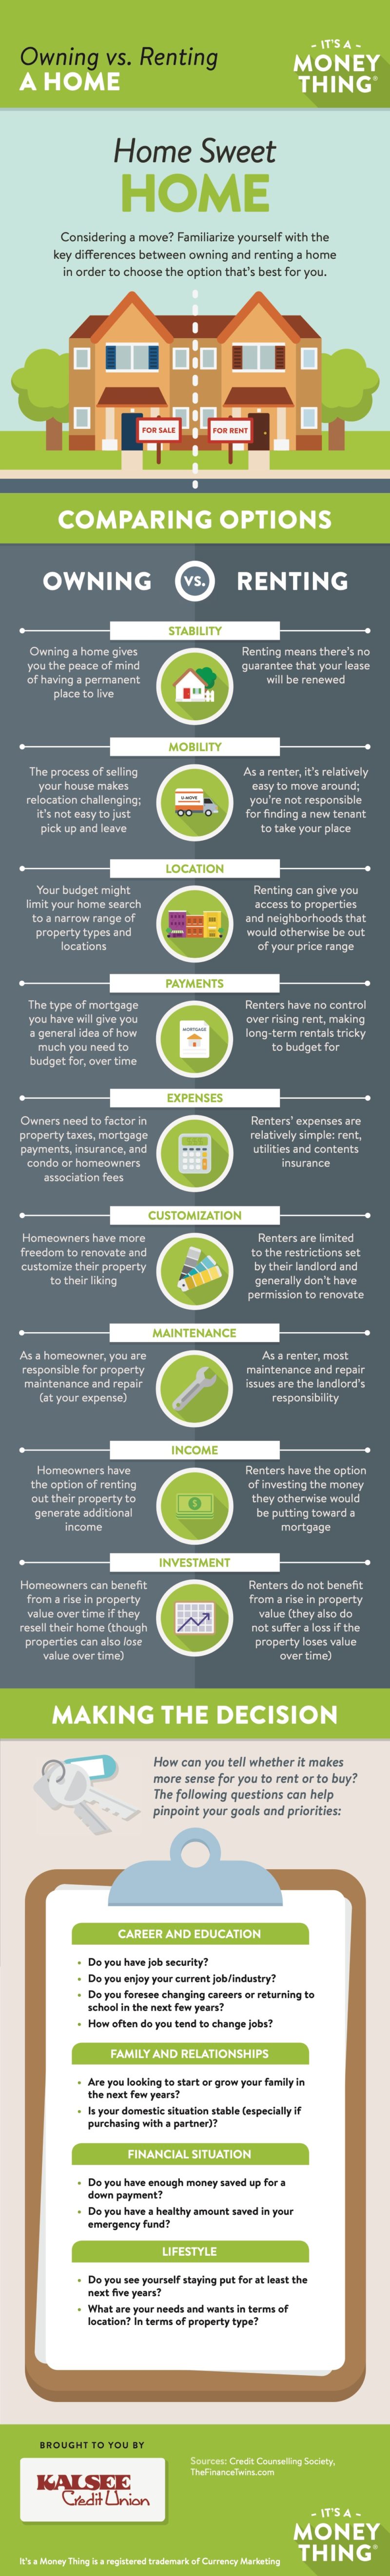 Owning versus Renting infographic, click for transcription